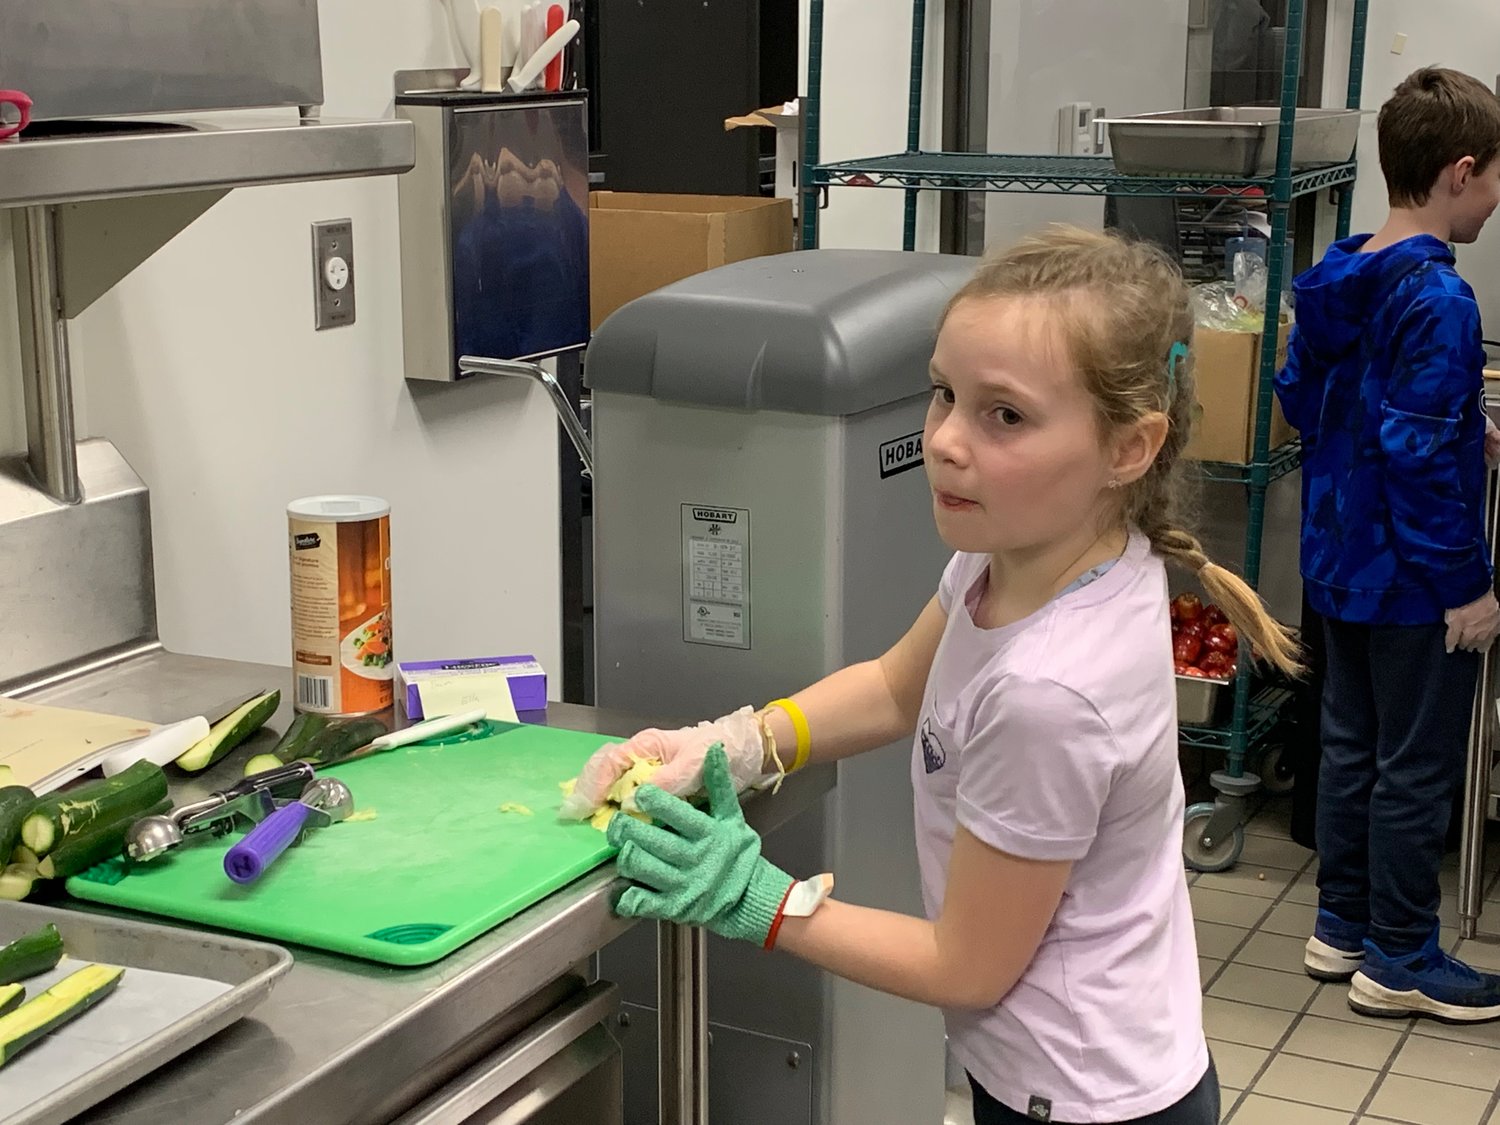 Eight Orin Smith Elementary School students competed in the Future Chefs National Challenge on Thursday. The challenge, which took place after school at Orin Smith, involved each student working with an adult to cook a healthy recipe they submitted prior to entering the competition. 